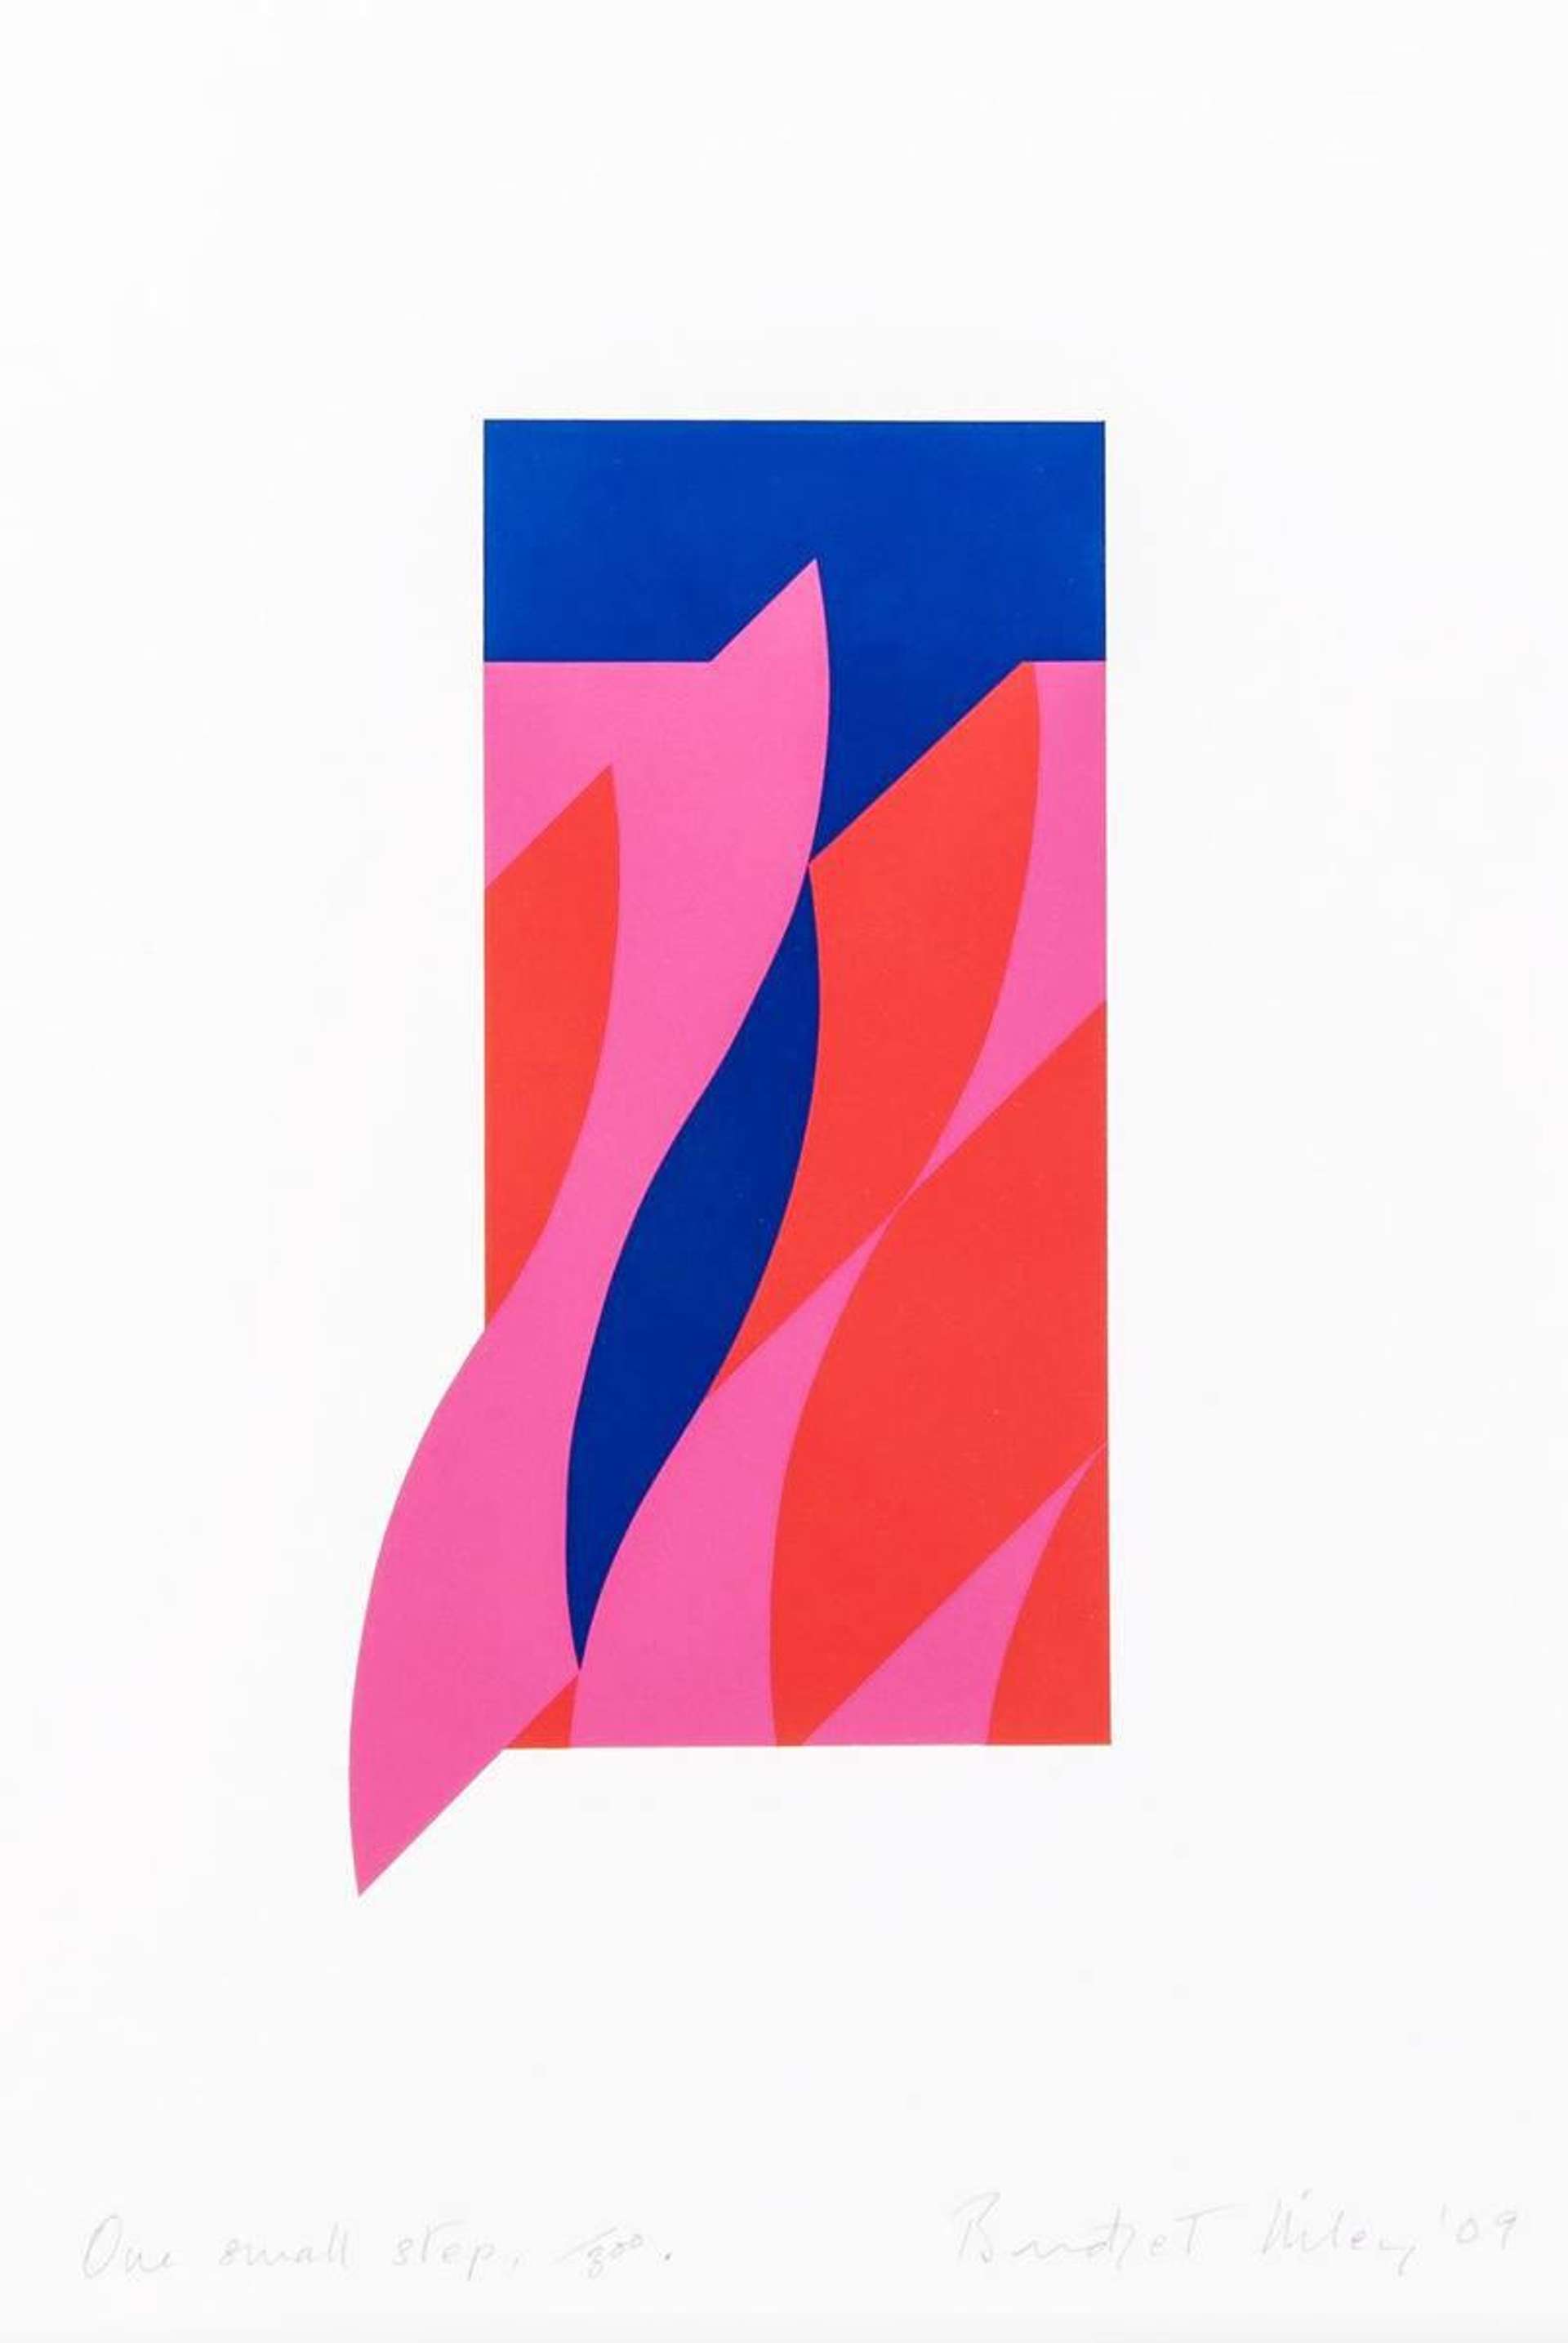 Blue, pink and red abstract shape set on a white background